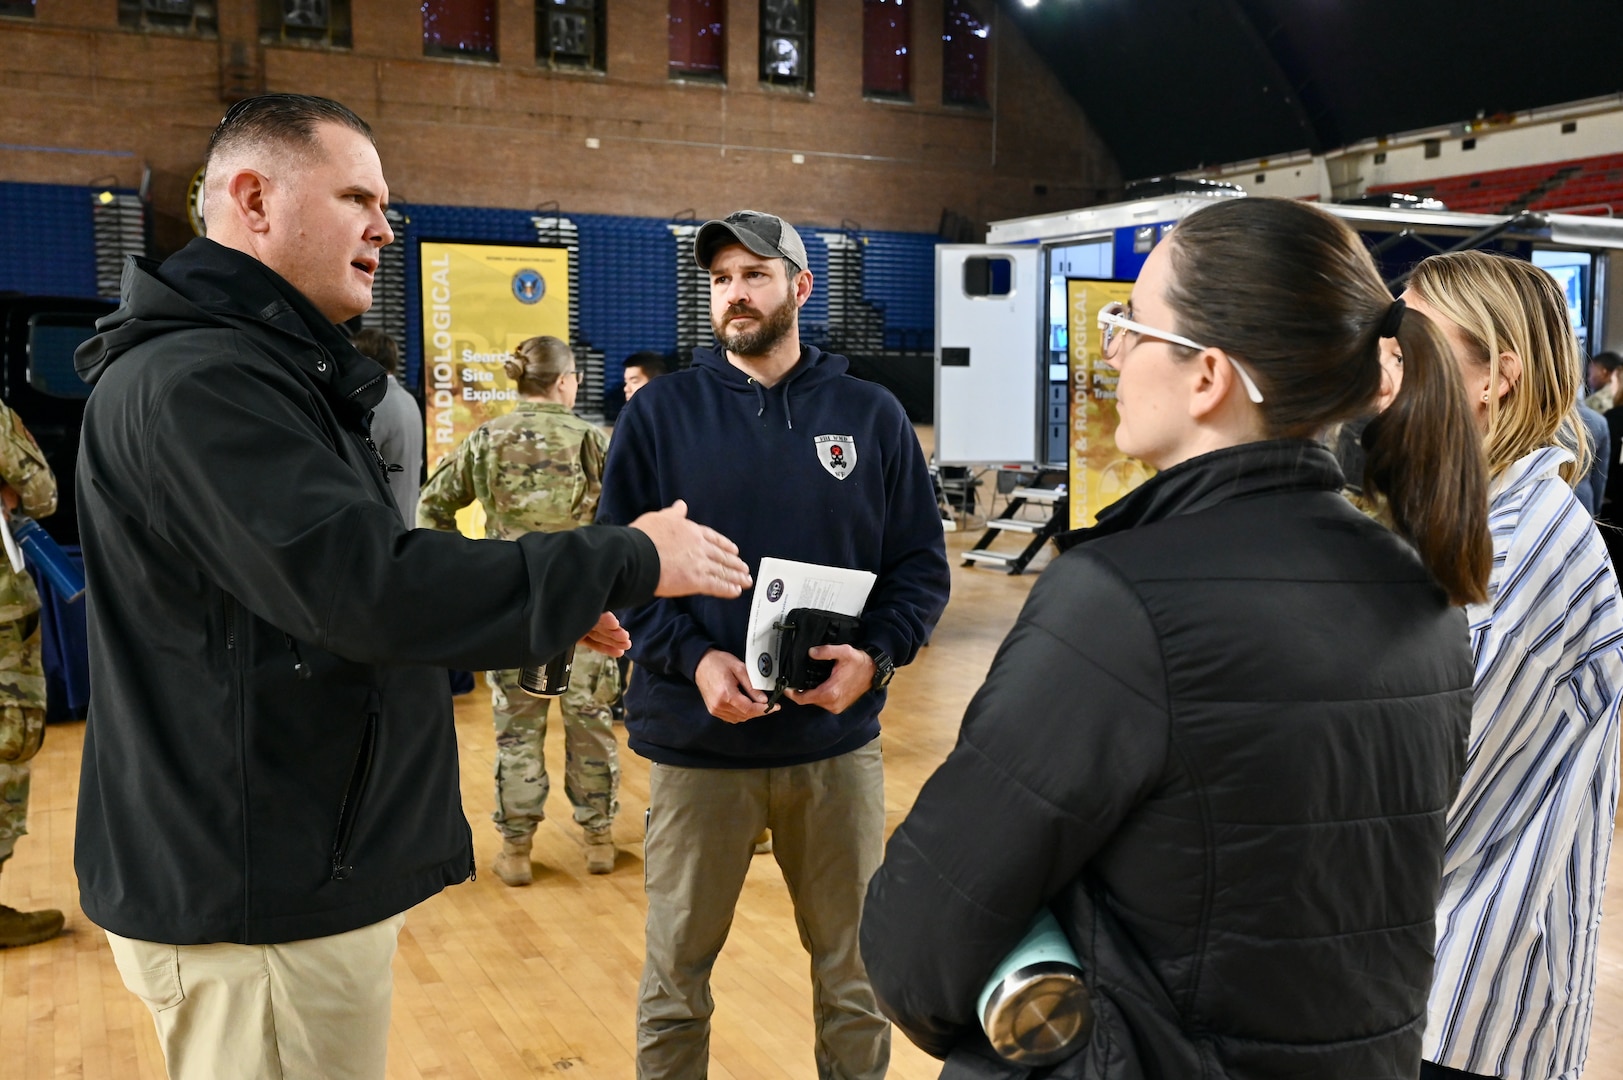 National Guard Bureau (NGB) J39 hosted a WMD-CST Capabilities Symposium allowing federal partners, state/local agencies, and civilian first responders to get an up-close look at the 33rd Weapons of Mass Destruction Civil Support Team (WMD-CST) at the D.C. Armory, Nov. 6, 2023. The team is able to deploy rapidly, respond to an incident within 90 minutes and assist local first-responders in determining the nature of a weapon of mass destruction or chemical, biological, radiological, nuclear, and explosive incidents. Earlier this year, the 33rd WMD-CST acquired a Vehicle-Mounted Radiological Detection System (VMRDS). (U.S. Air National Guard photo by Master Sgt. Arthur Wright)